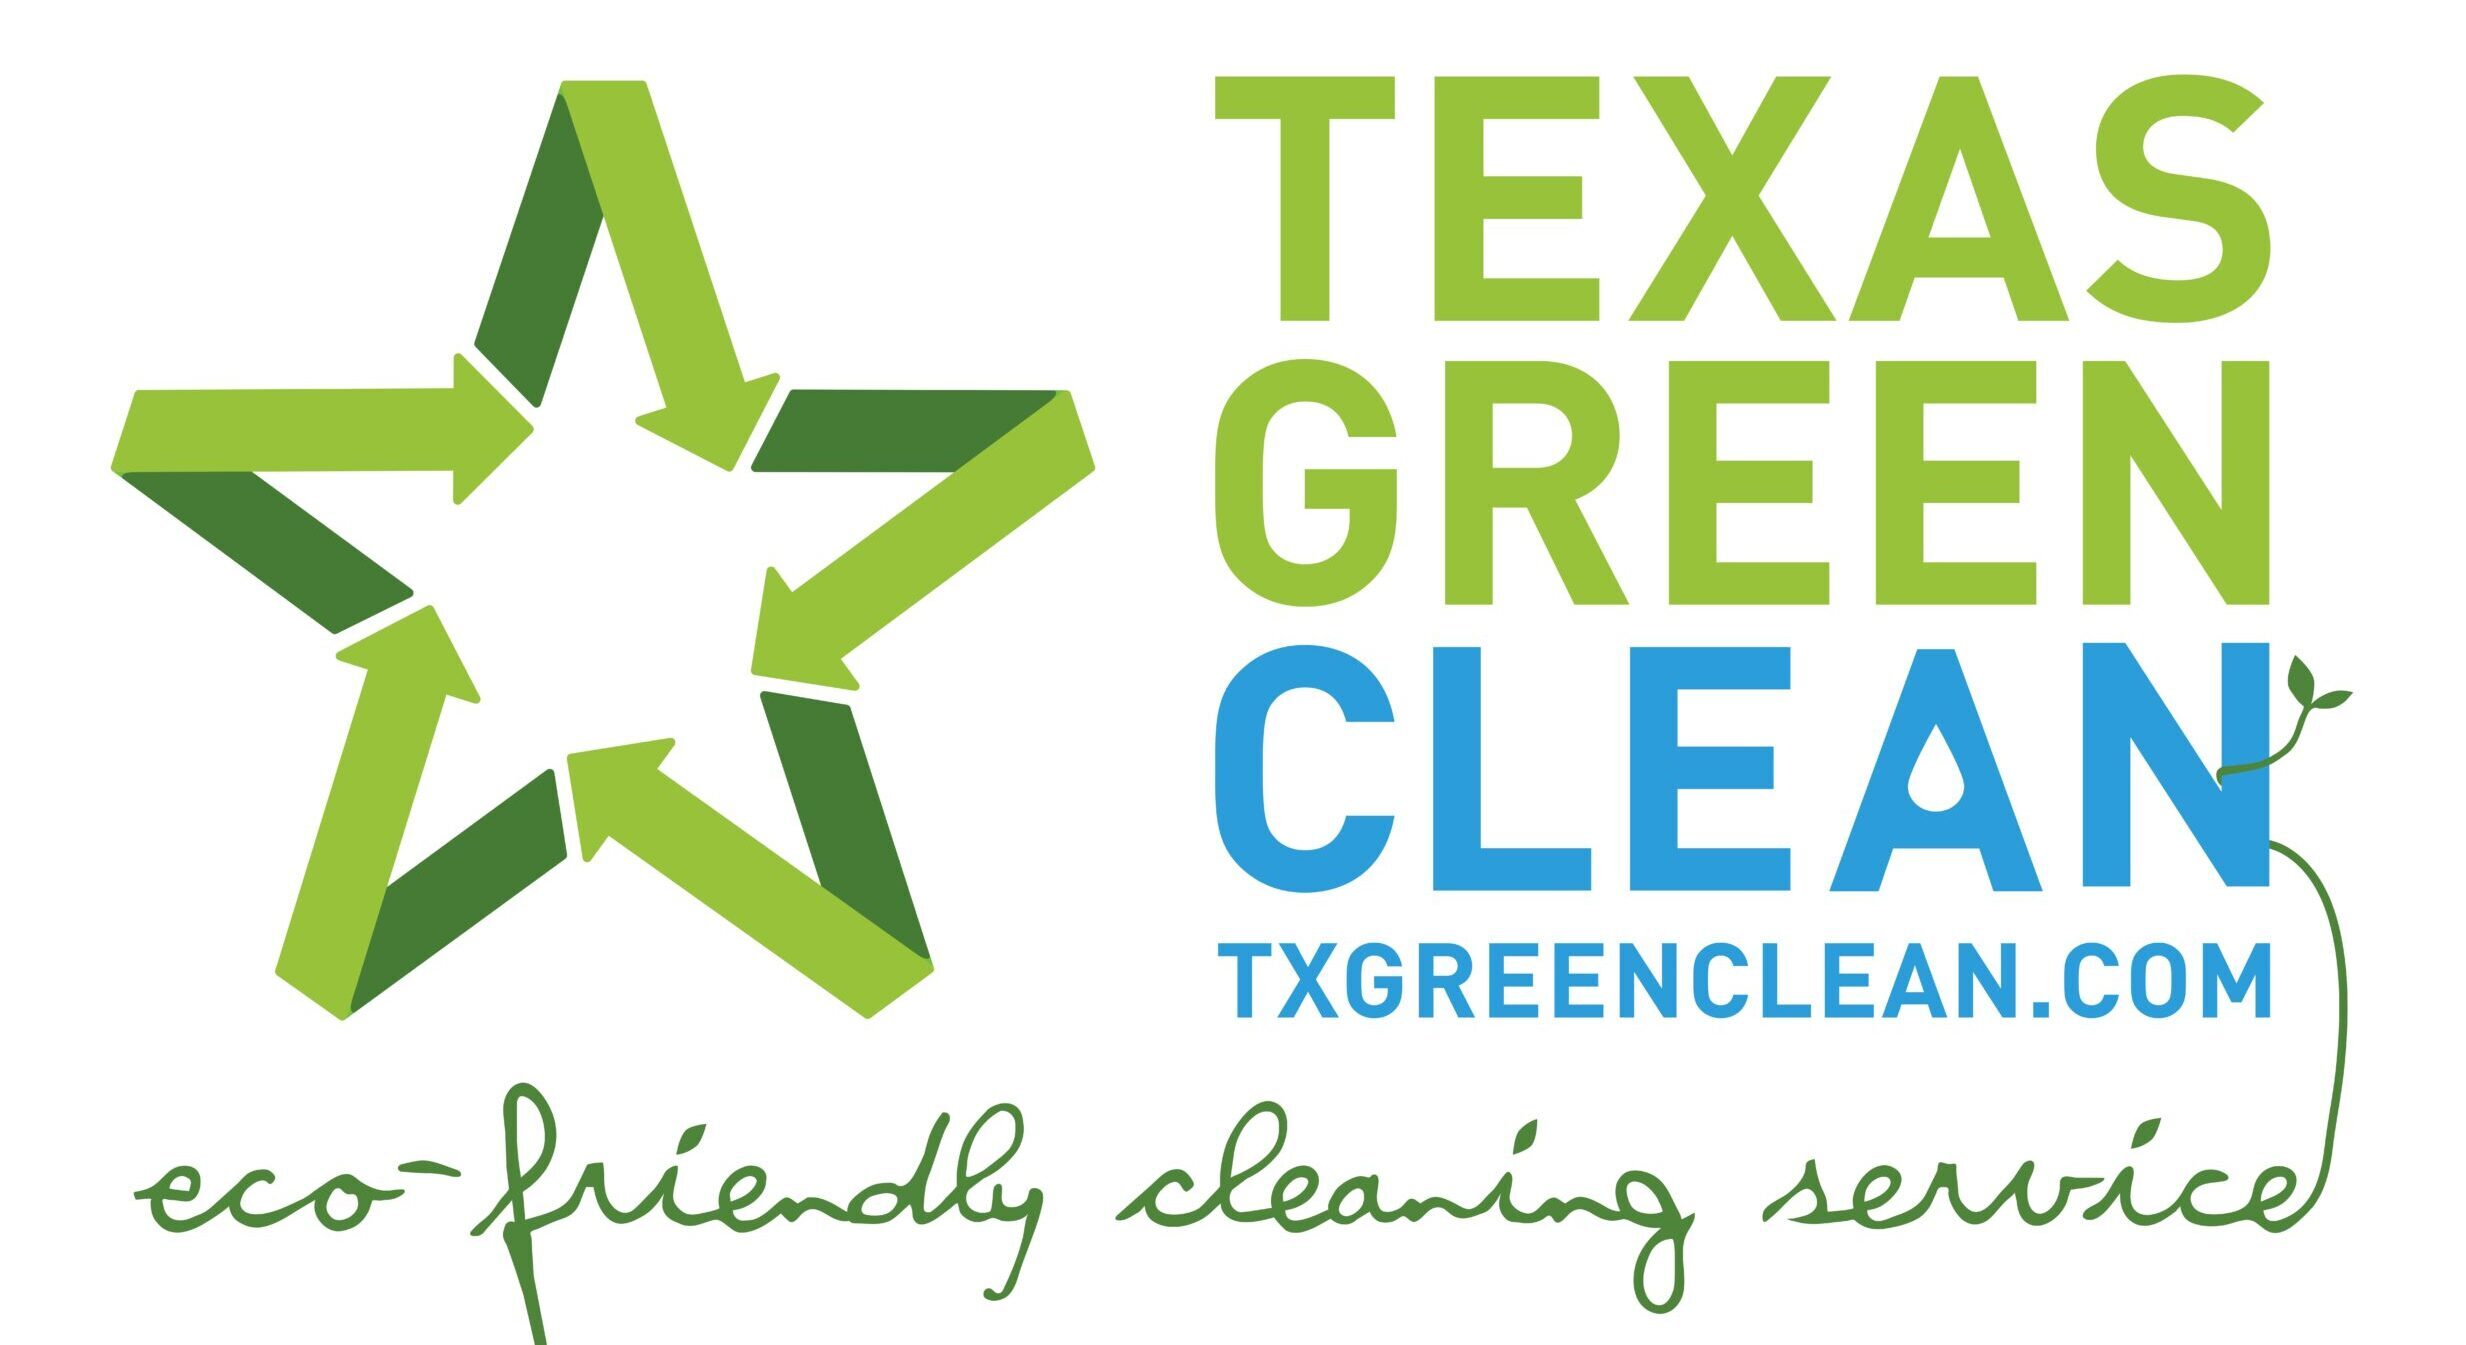 Texas Green Clean txgreenclean.com eco-friendly cleaning service